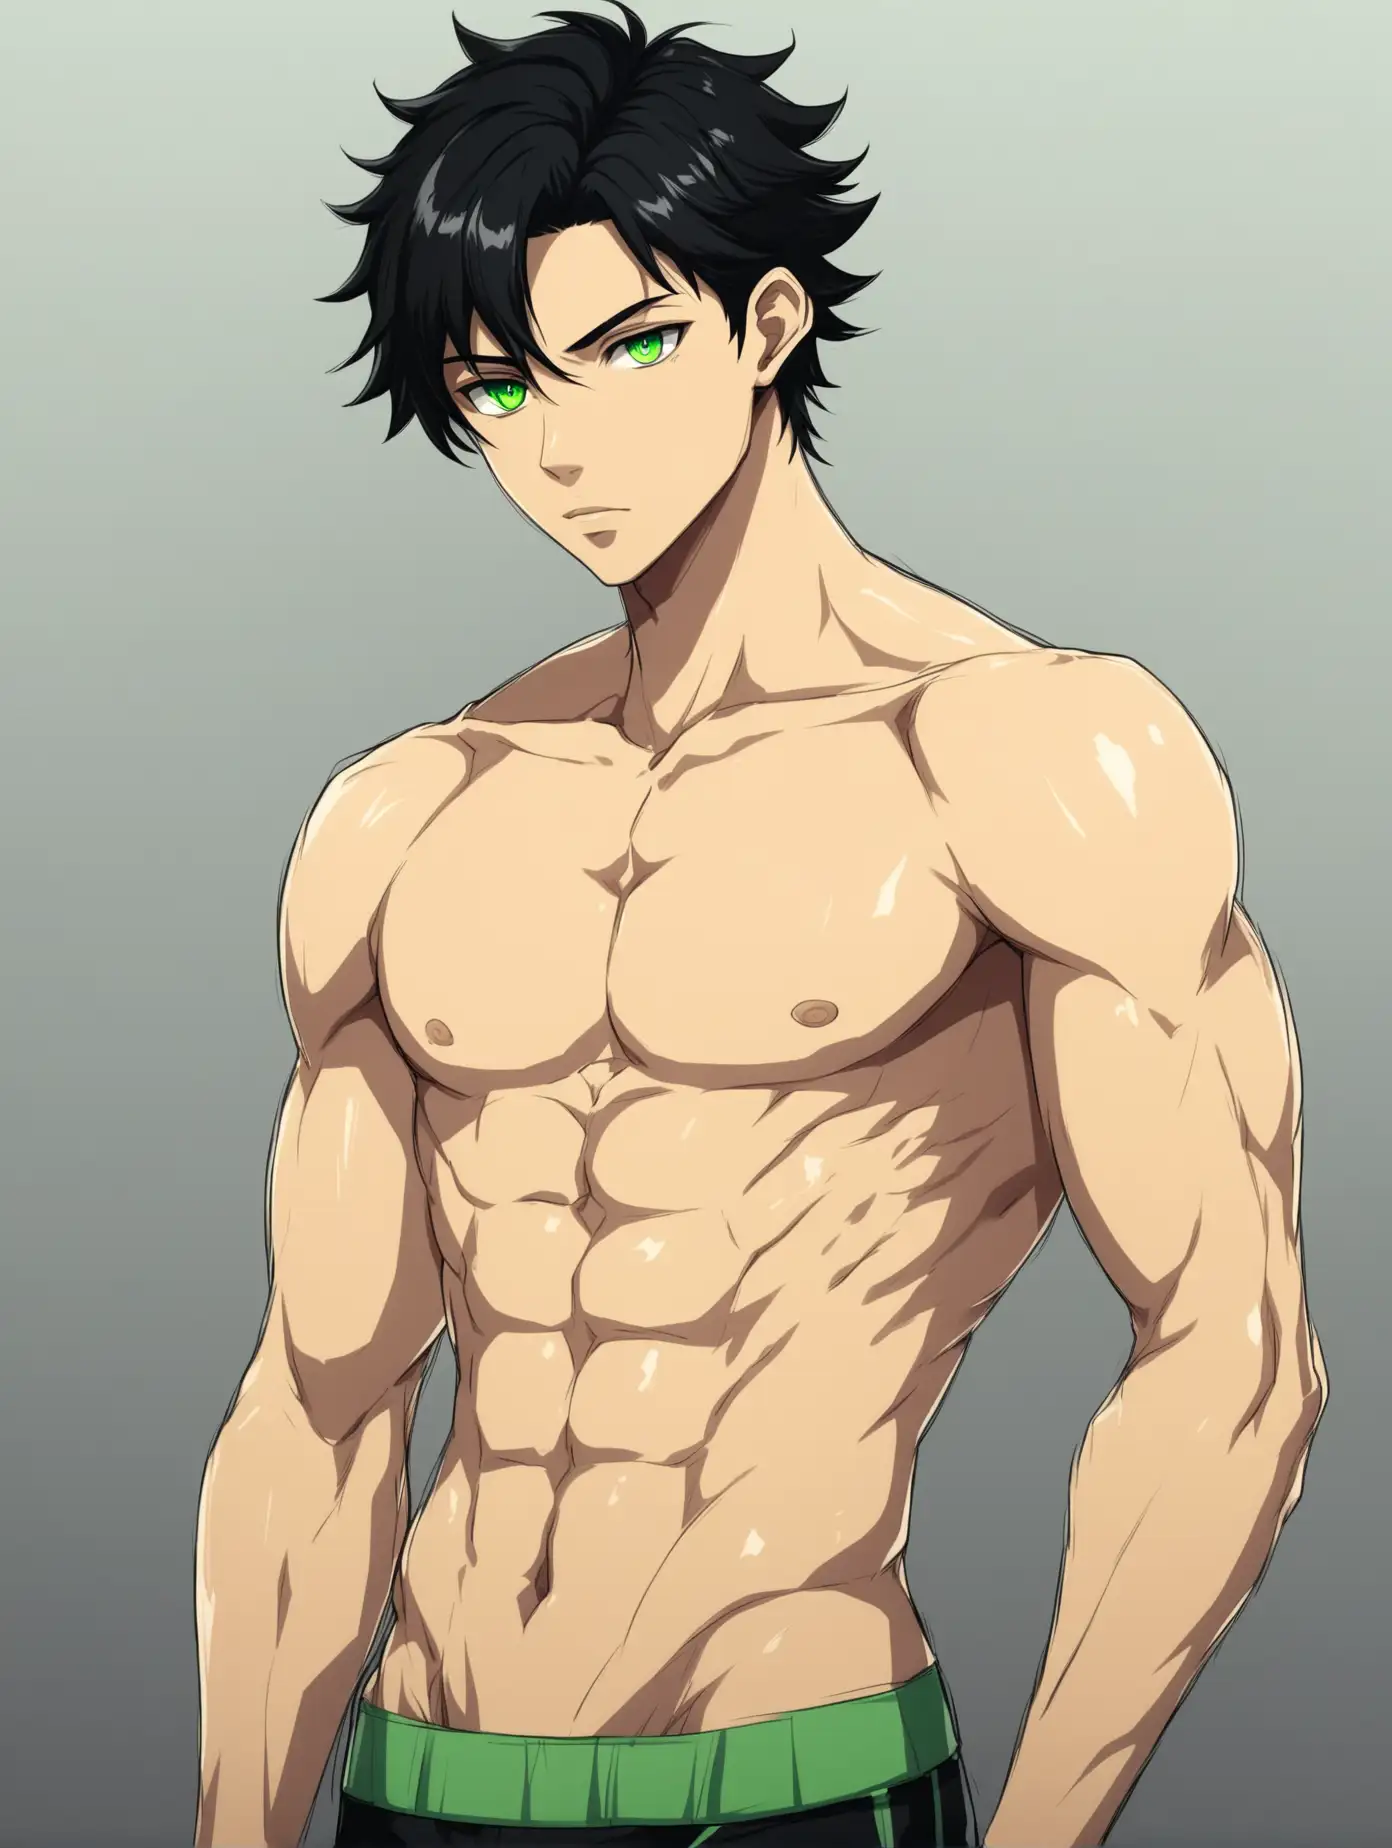 Slim-Sexy-Young-Male-Anime-Character-with-Black-Hair-and-Green-Eyes